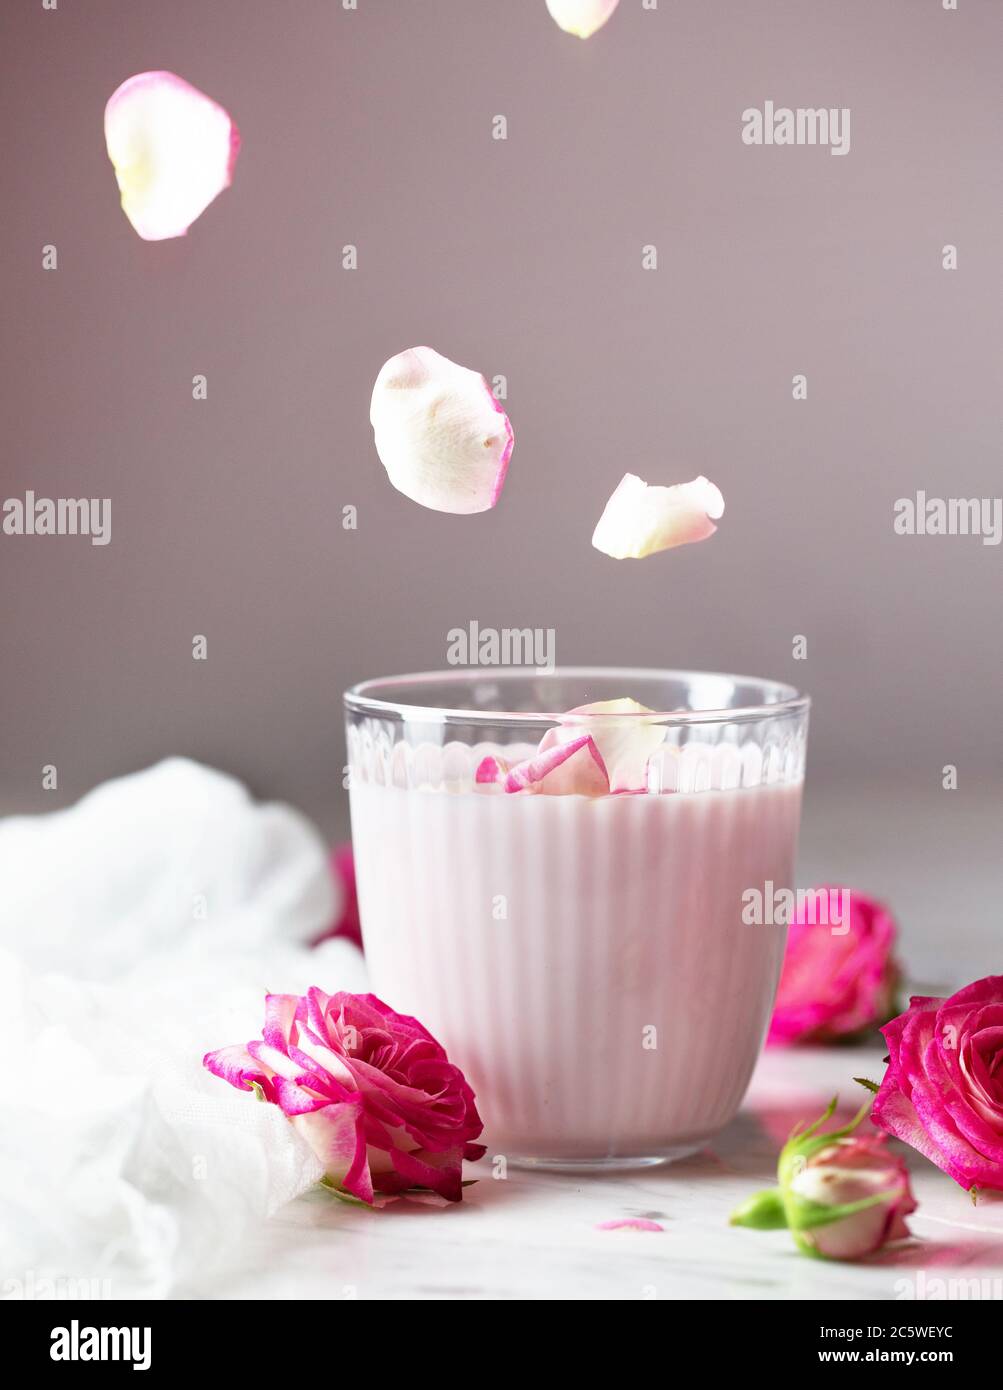 Moon milk prepares with pink rose flower. Trendy bedtime drink form Ayurvedic traditions Stock Photo